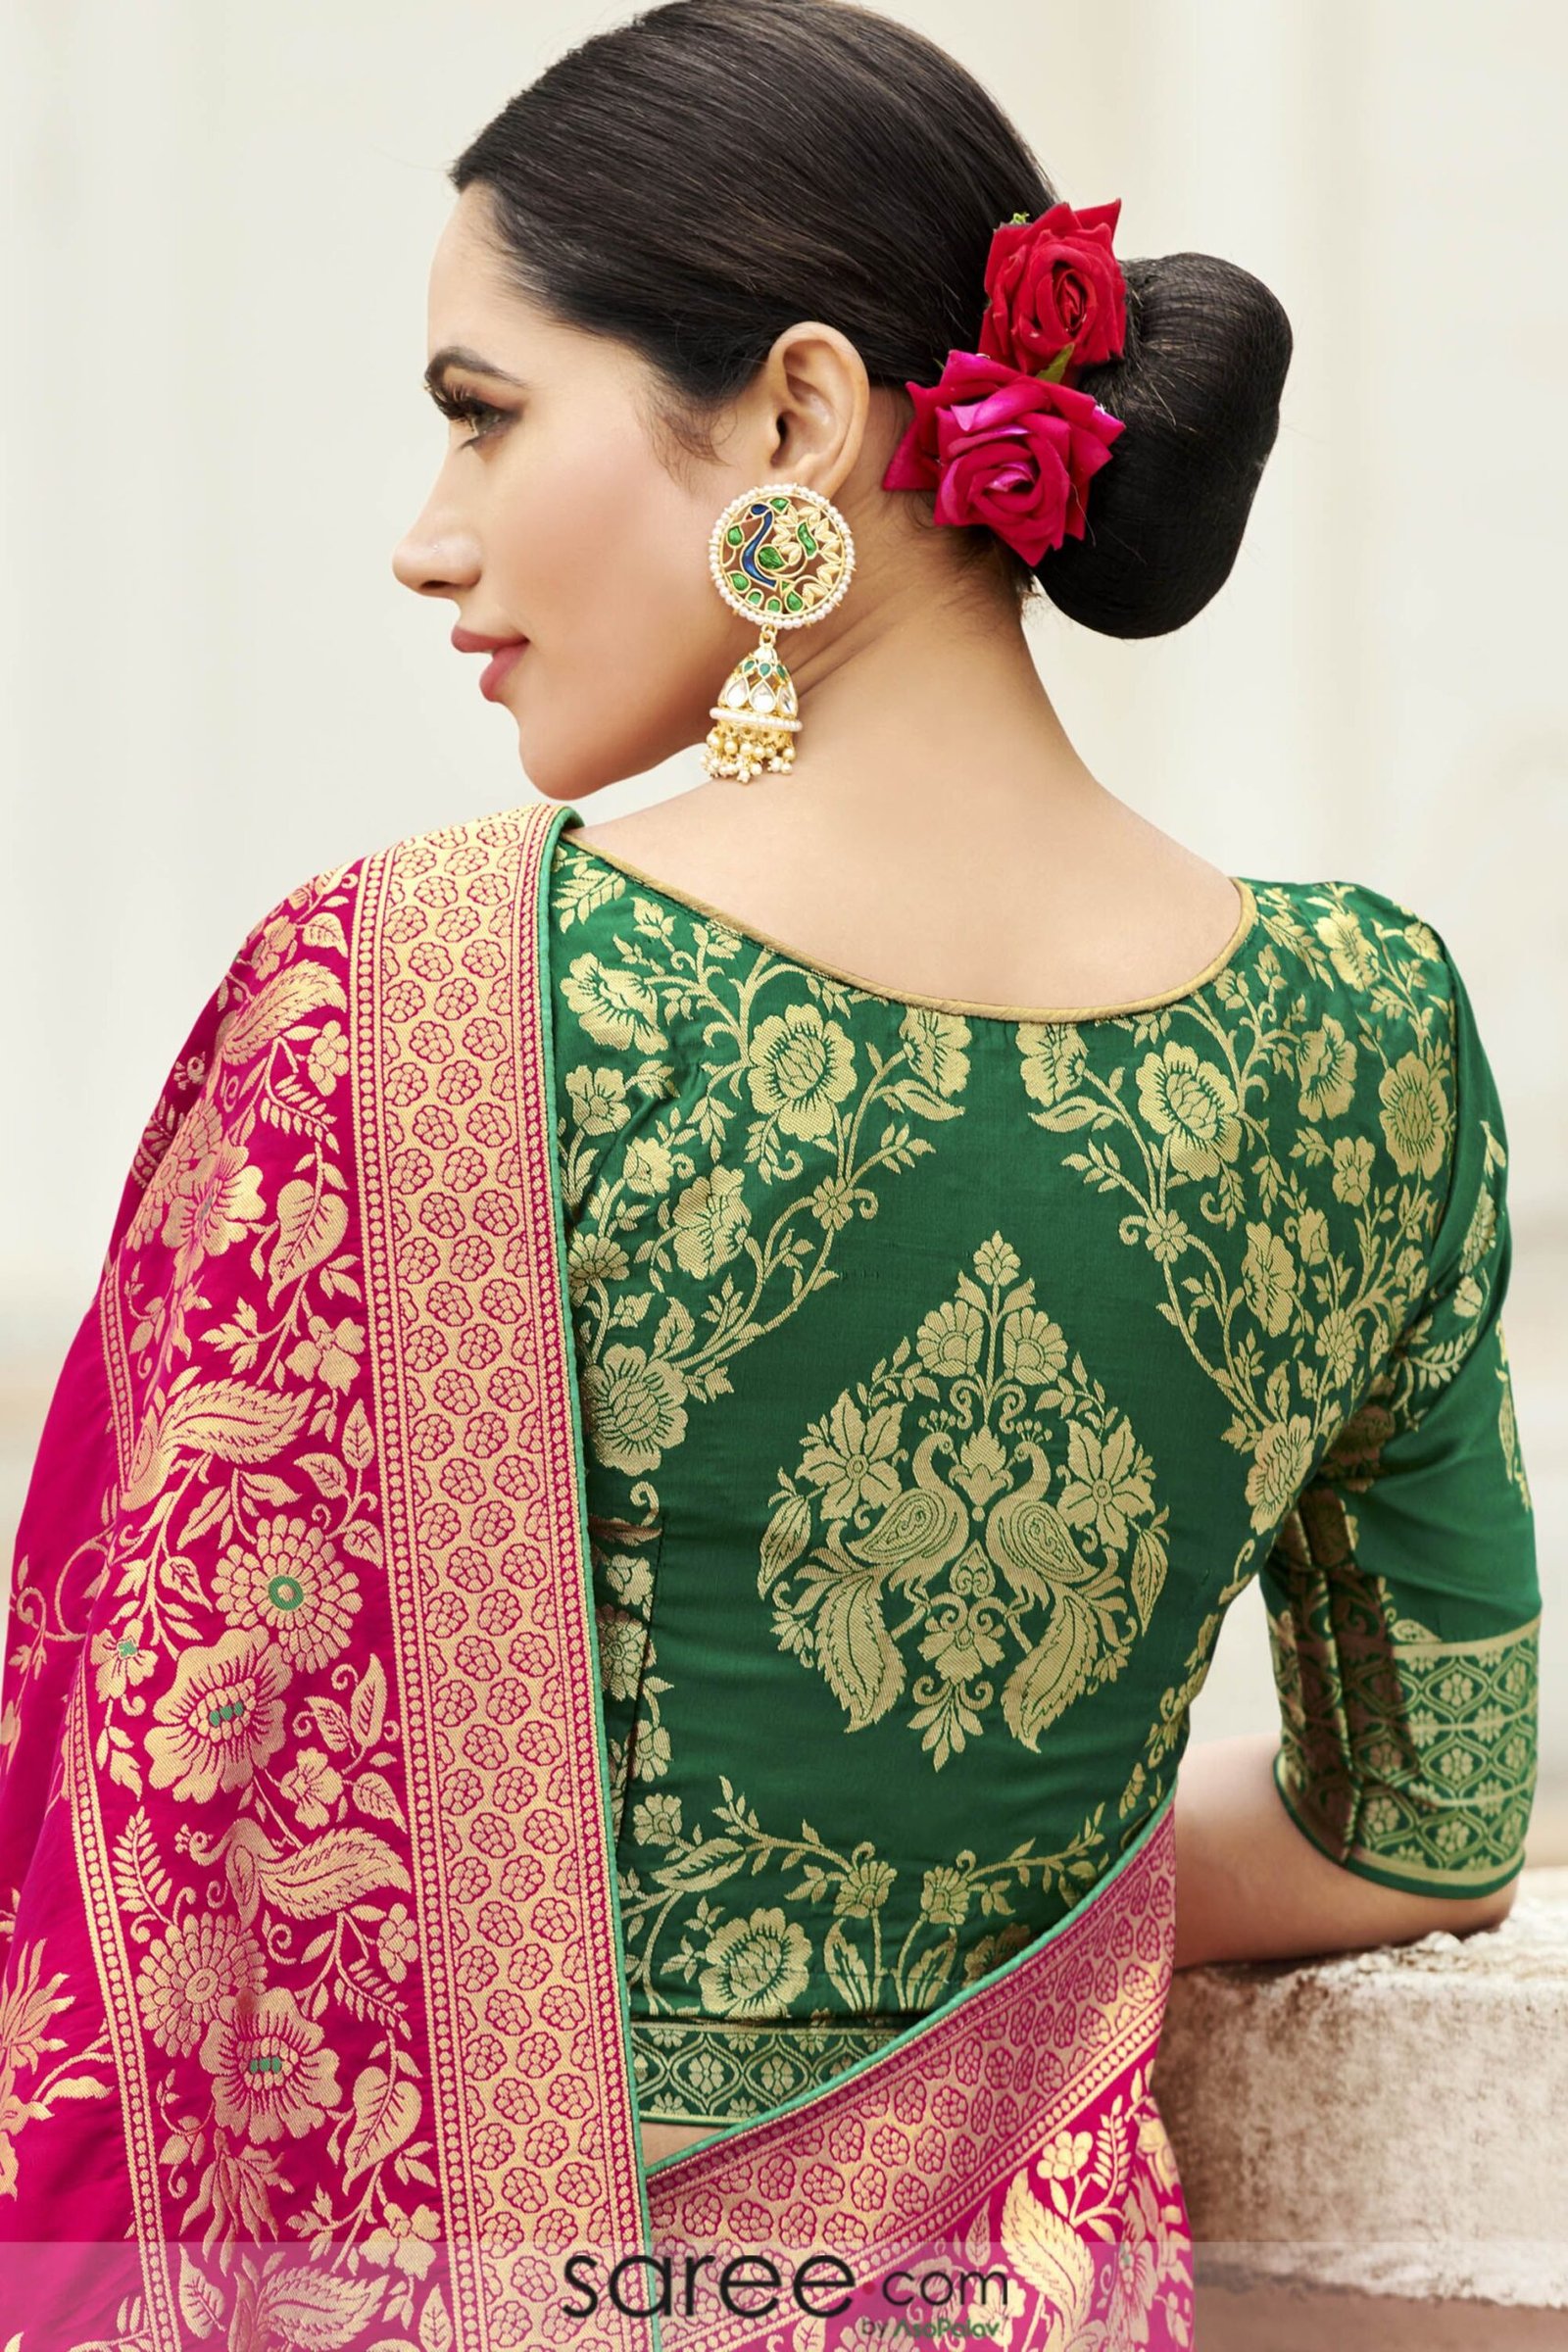 Match silk sarees with contrast-colored blouses